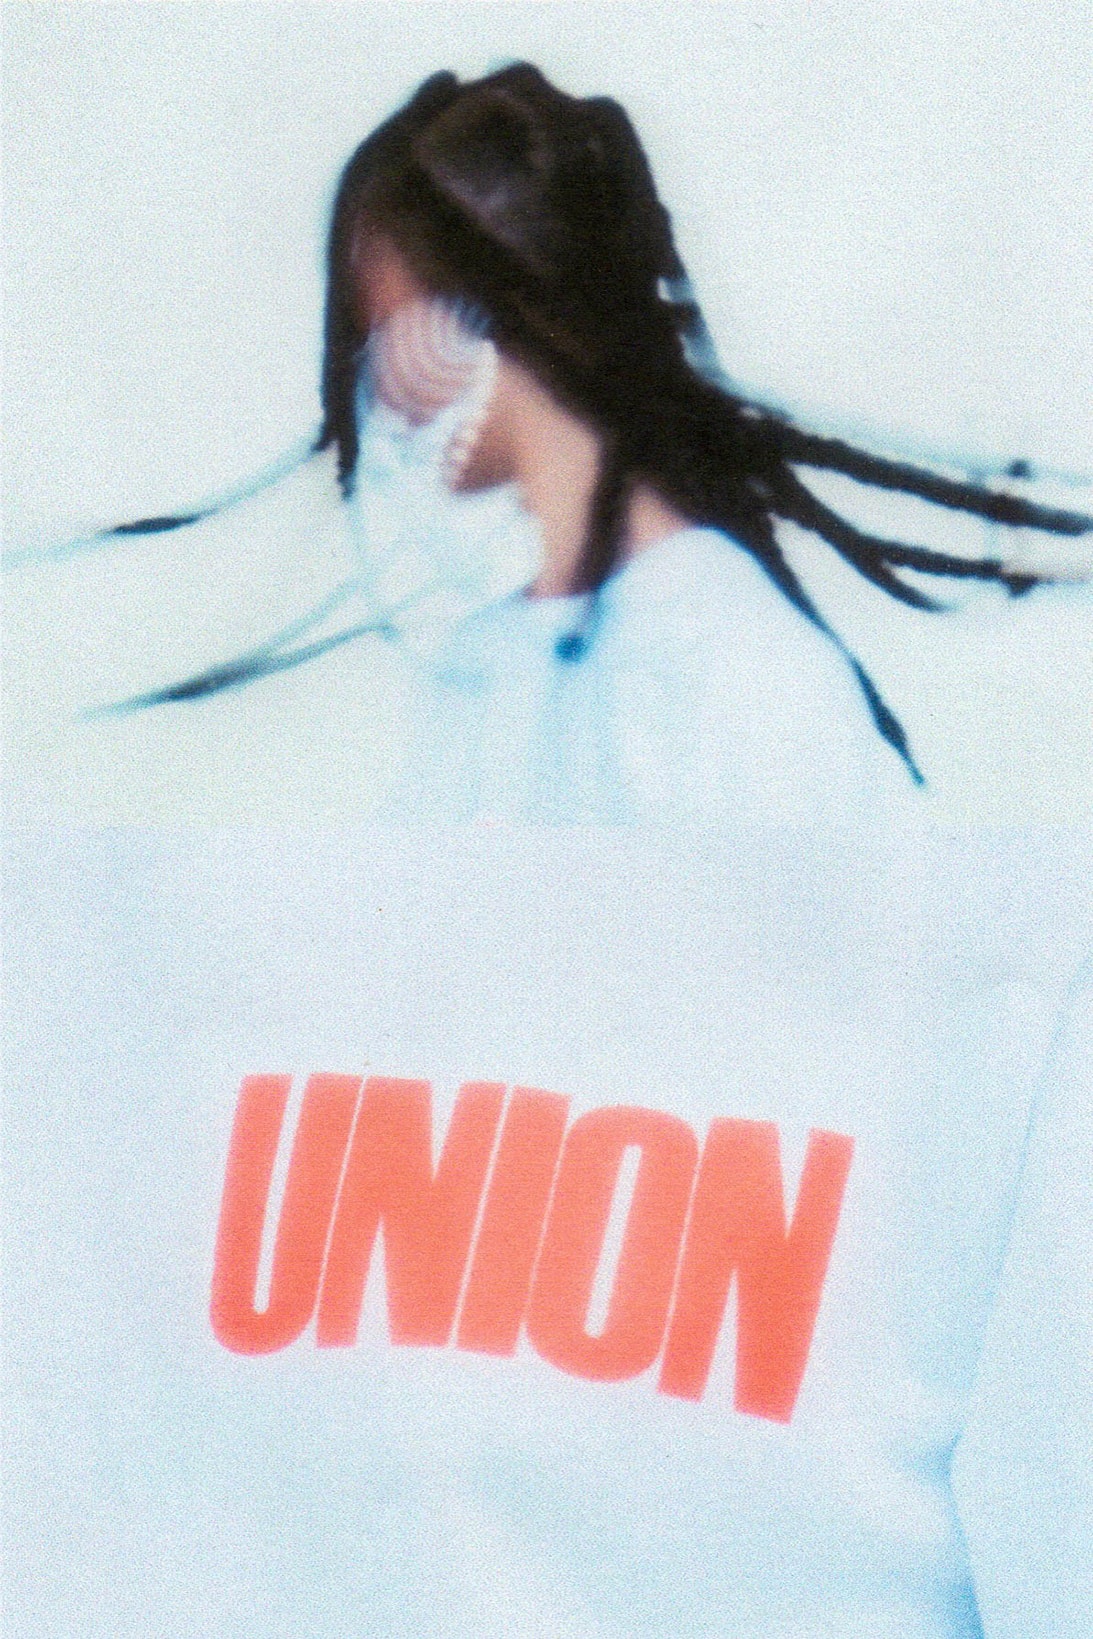 Girls Dont Cry Union Los Angeles Capsule Collection collaboration july 2 2018 release date info drop